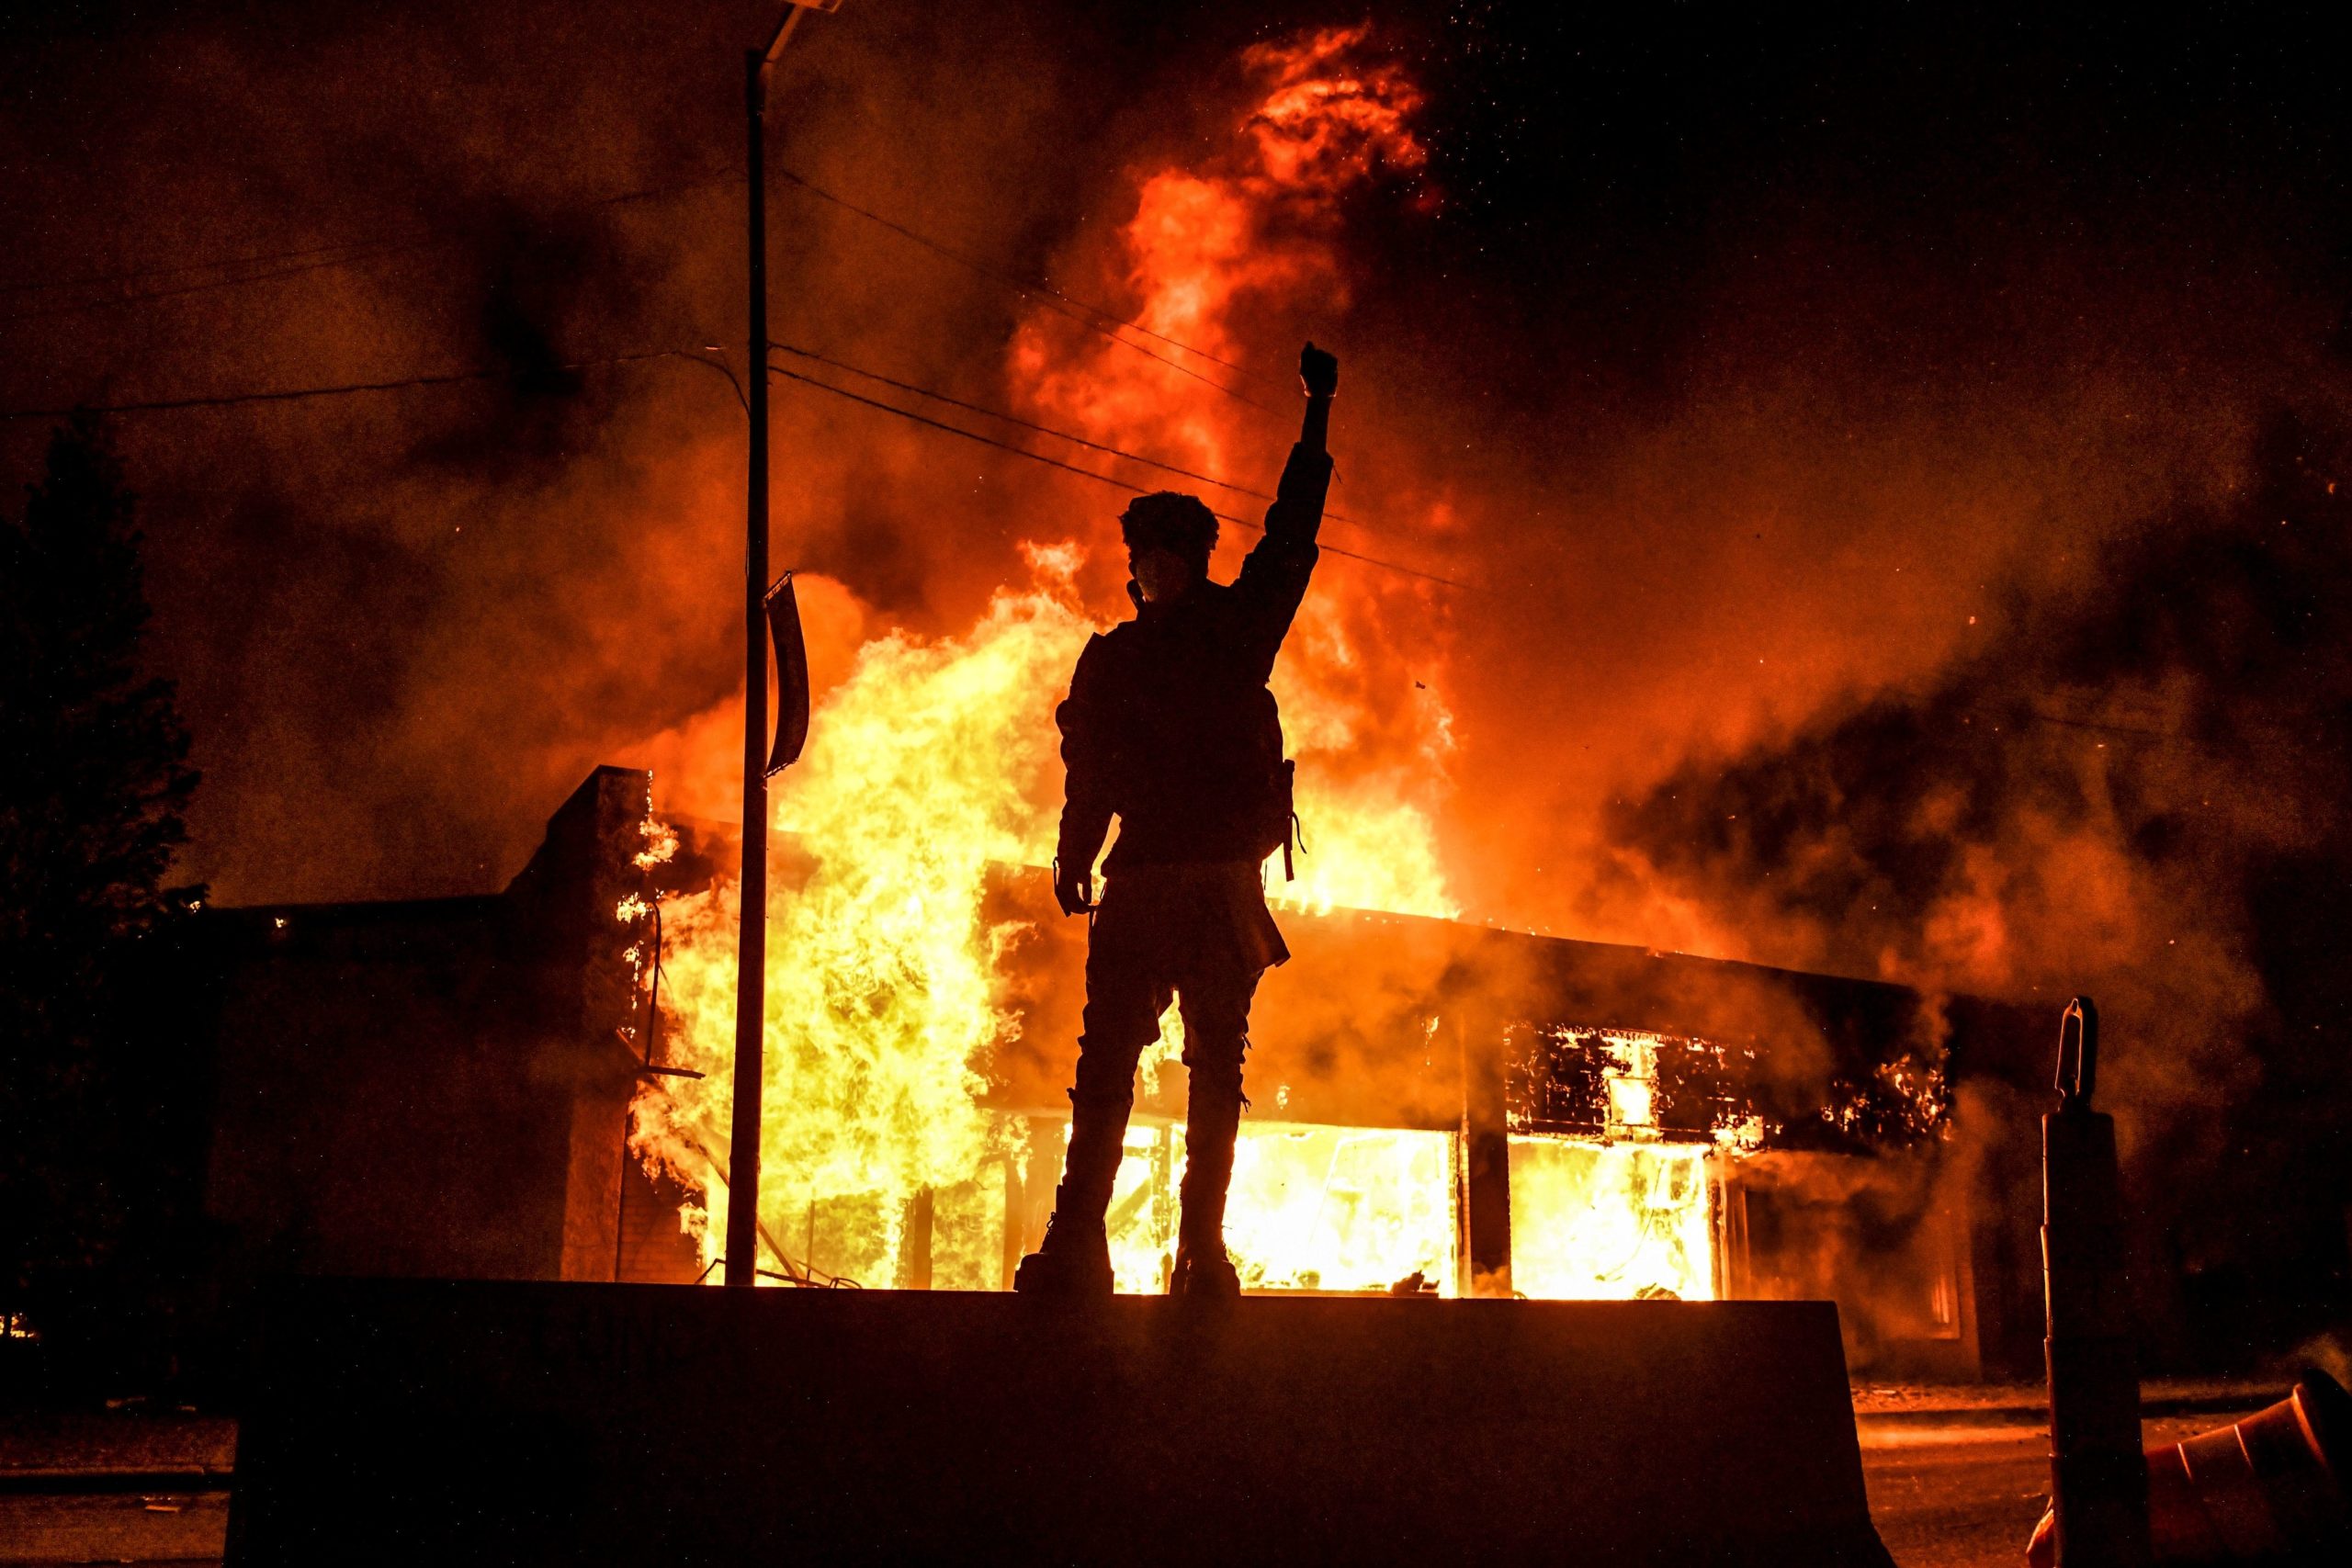 TOPSHOT - A protester reacts standing in front of a burning building set on fire during a demonstration in Minneapolis, Minnesota, on May 29, 2020, over the death of George Floyd, a black man who died after a white policeman kneeled on his neck for several minutes. - Violent protests erupted across the United States late on May 29 over the death of a handcuffed black man in police custody, with murder charges laid against the arresting Minneapolis officer failing to quell seething anger. (CHANDAN KHANNA/AFP via Getty Images)